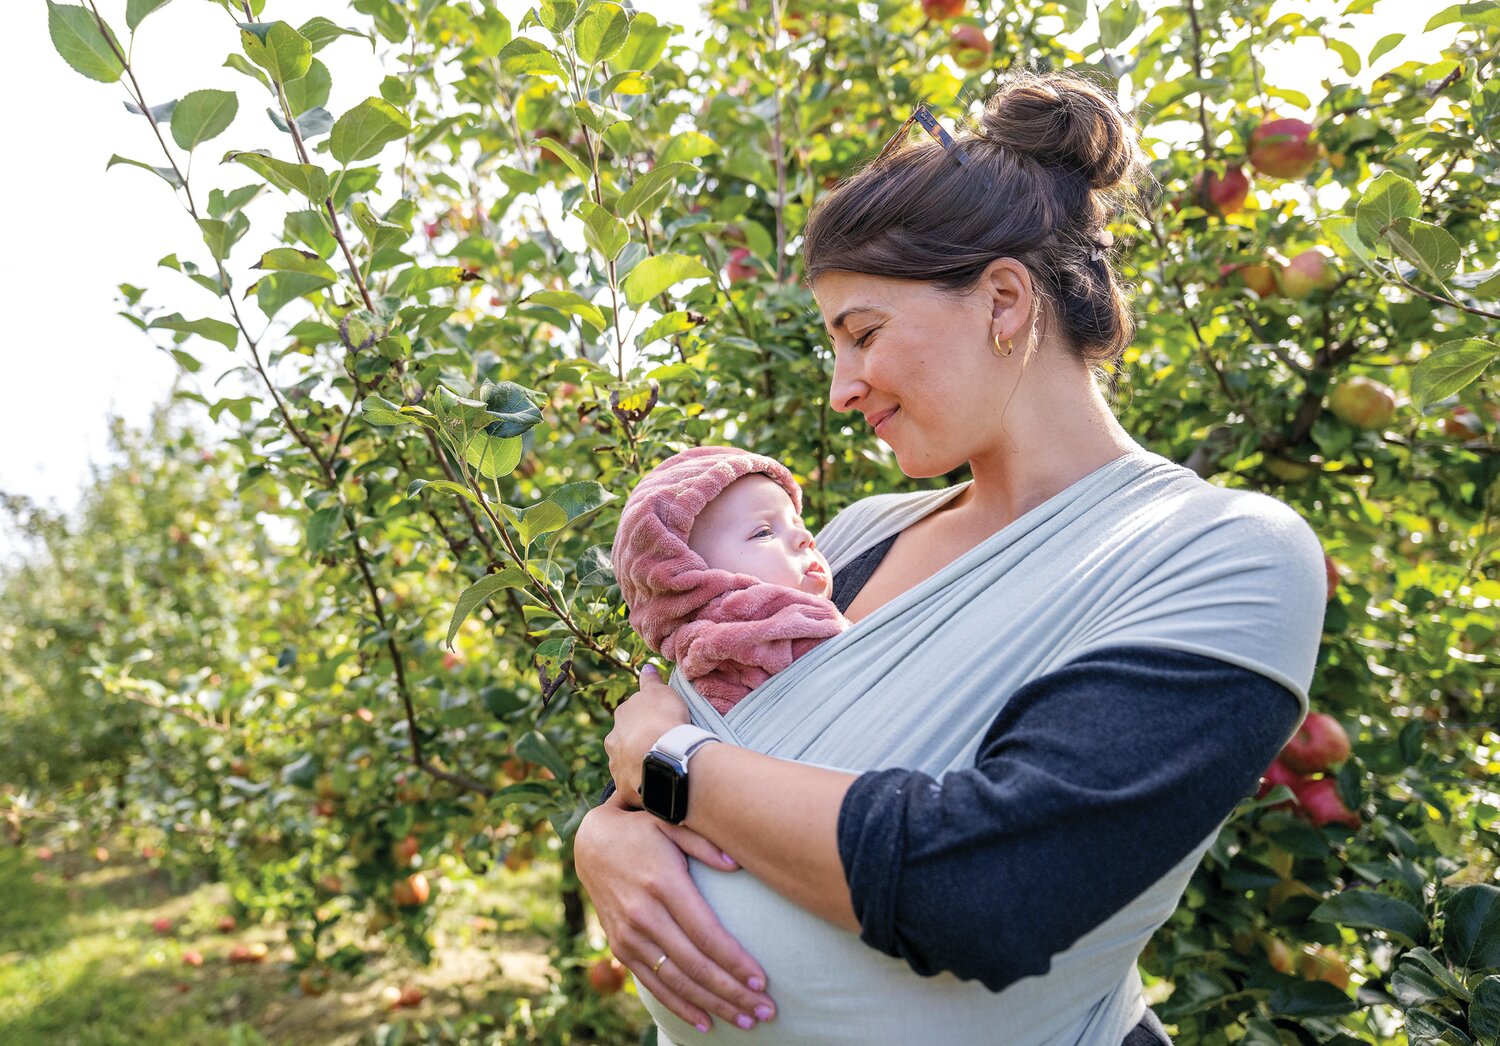 Allie Dinesen cradles her newborn while her family picks apples at Solebury Orchards Saturday afternoon.